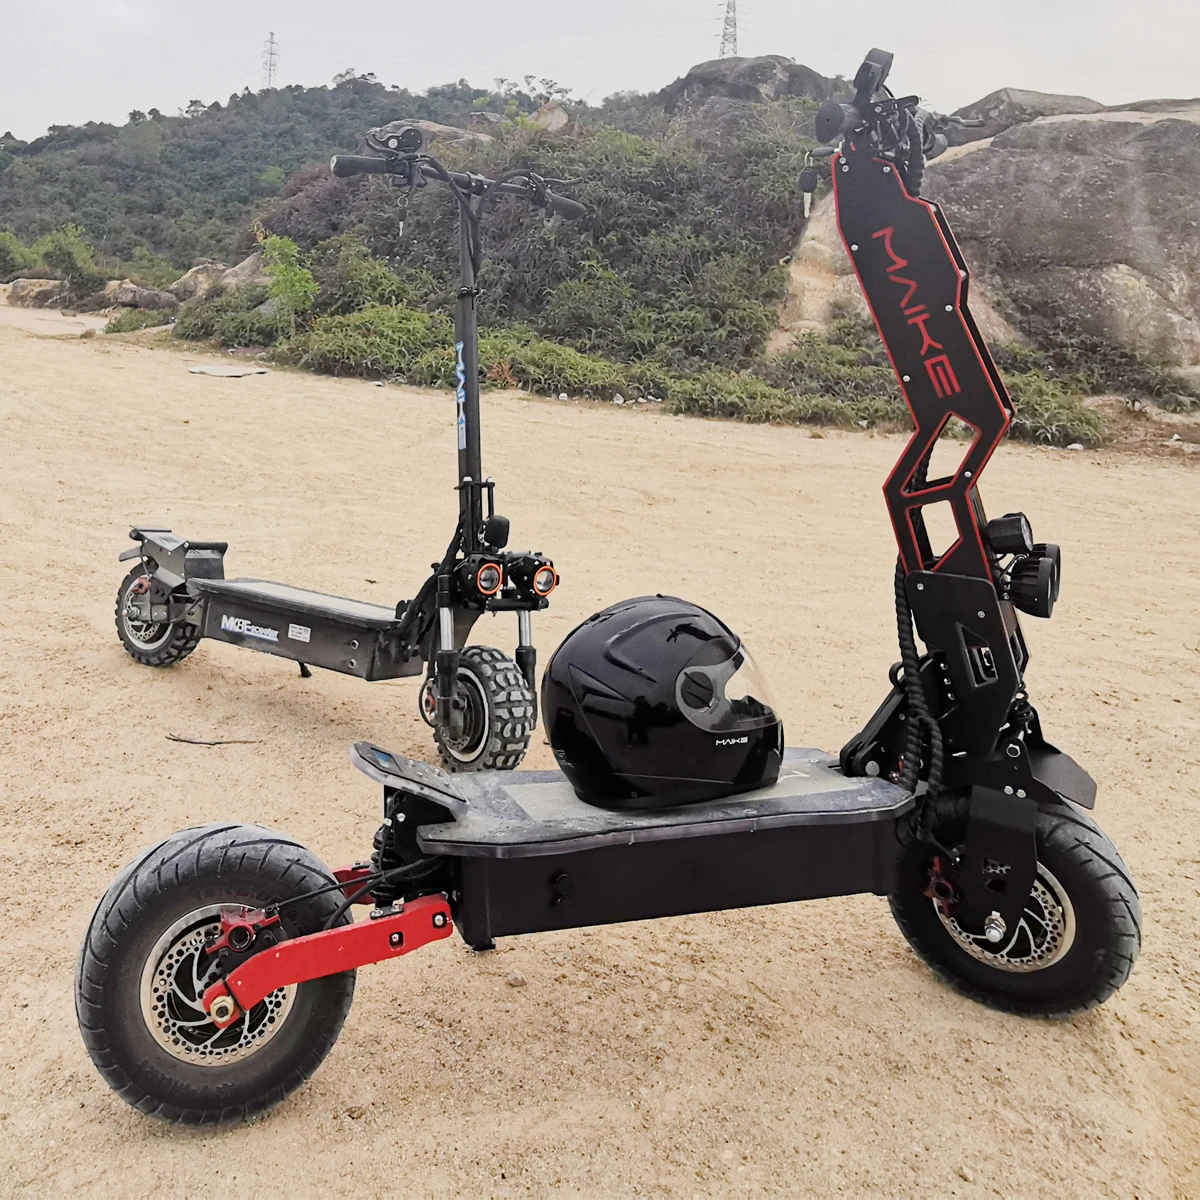 

Maike MKS 8000W eu Warehouse fast shipping black Friday off road 13 inch dual motor trottinette dualtron adult electric scooters